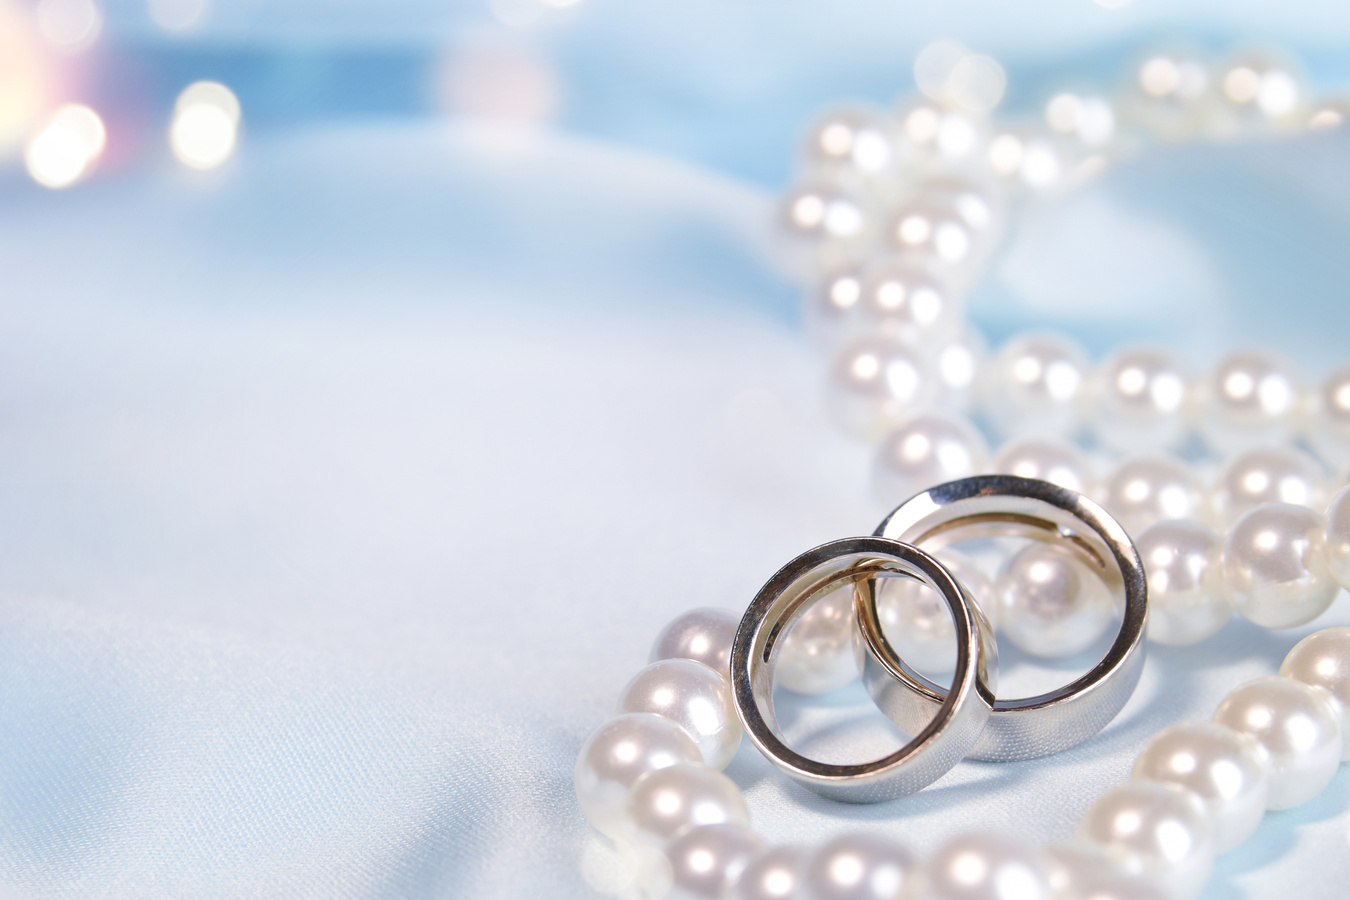 Wedding background with rings and pearls